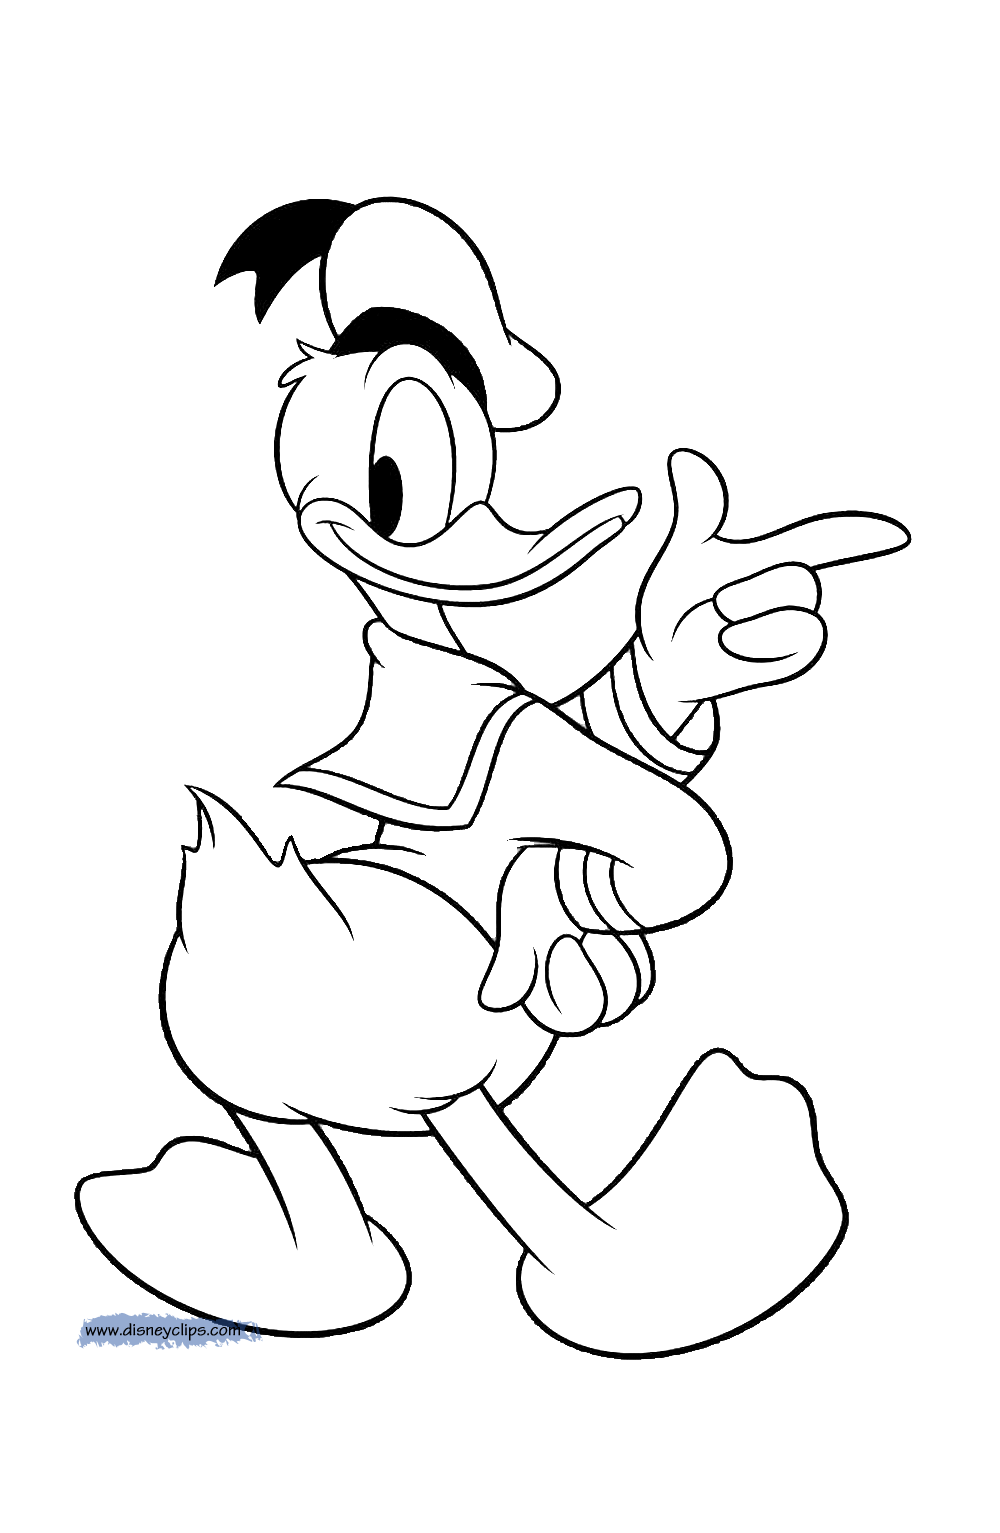 Donald Duck Coloring Pages 5   Disneyclips.com